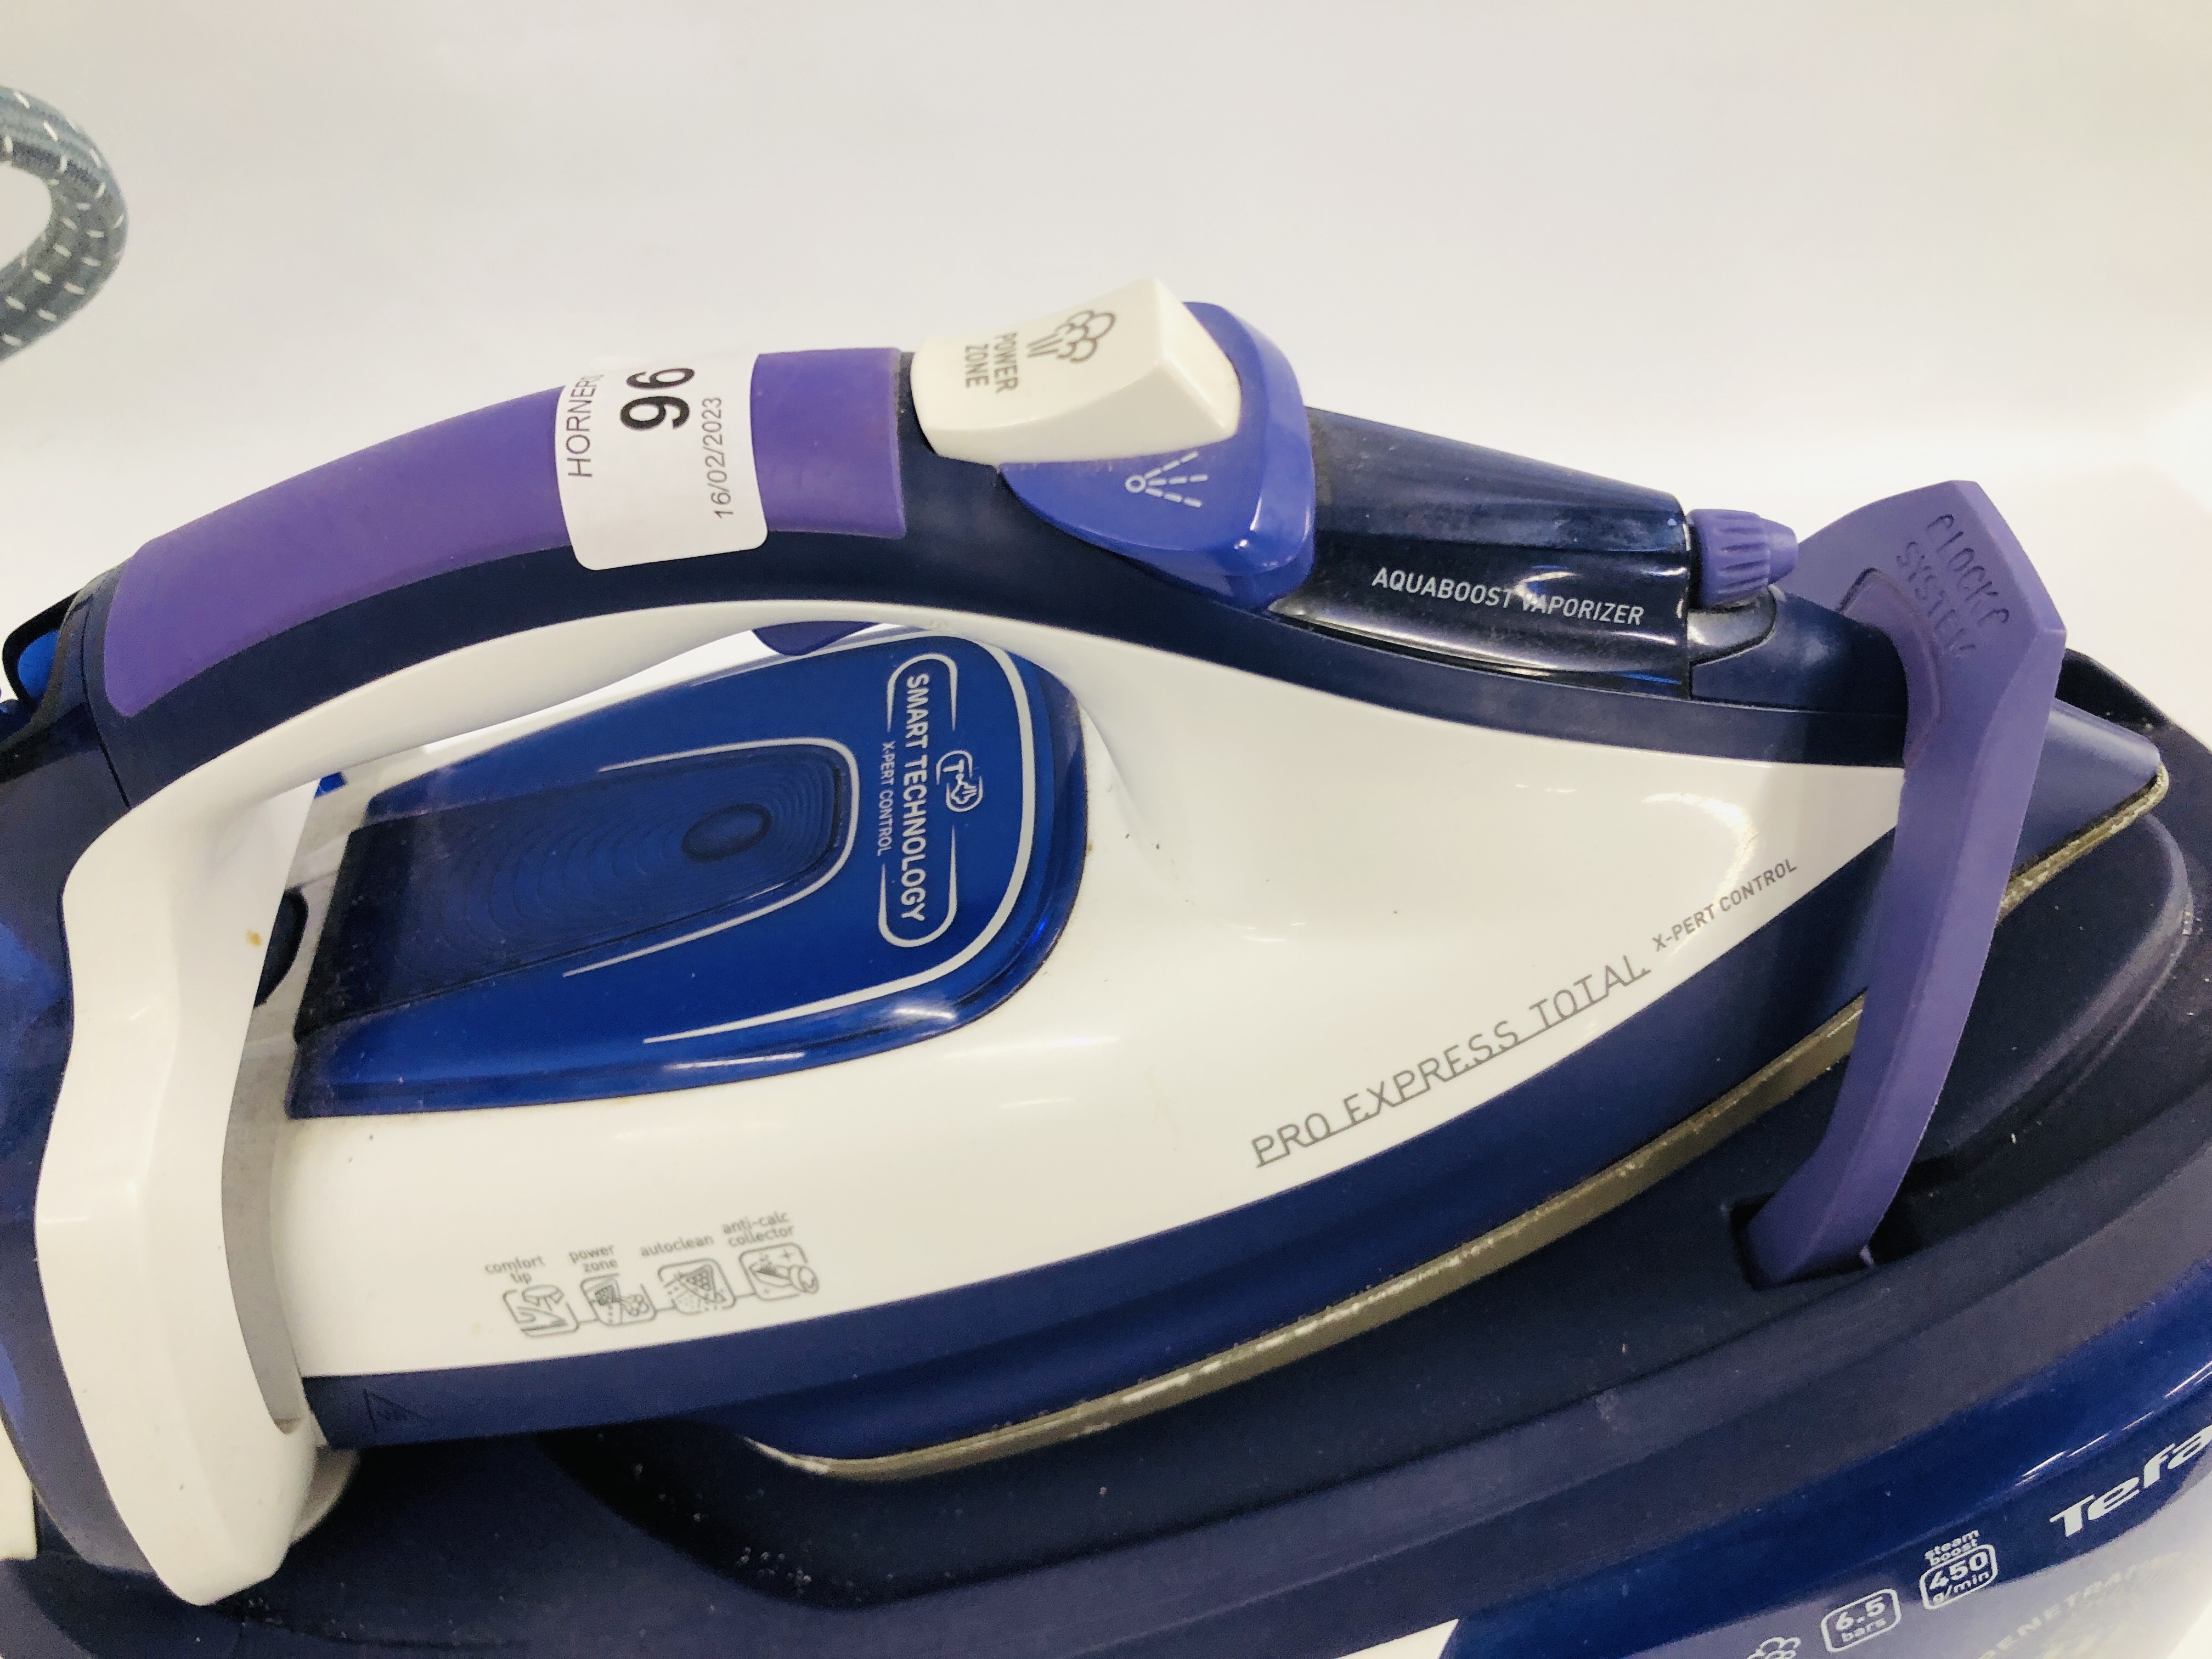 TEFAL PRO EXPRESS TOTAL X-PERT CONTROL STEAM IRON - SOLD AS SEEN. - Image 4 of 5